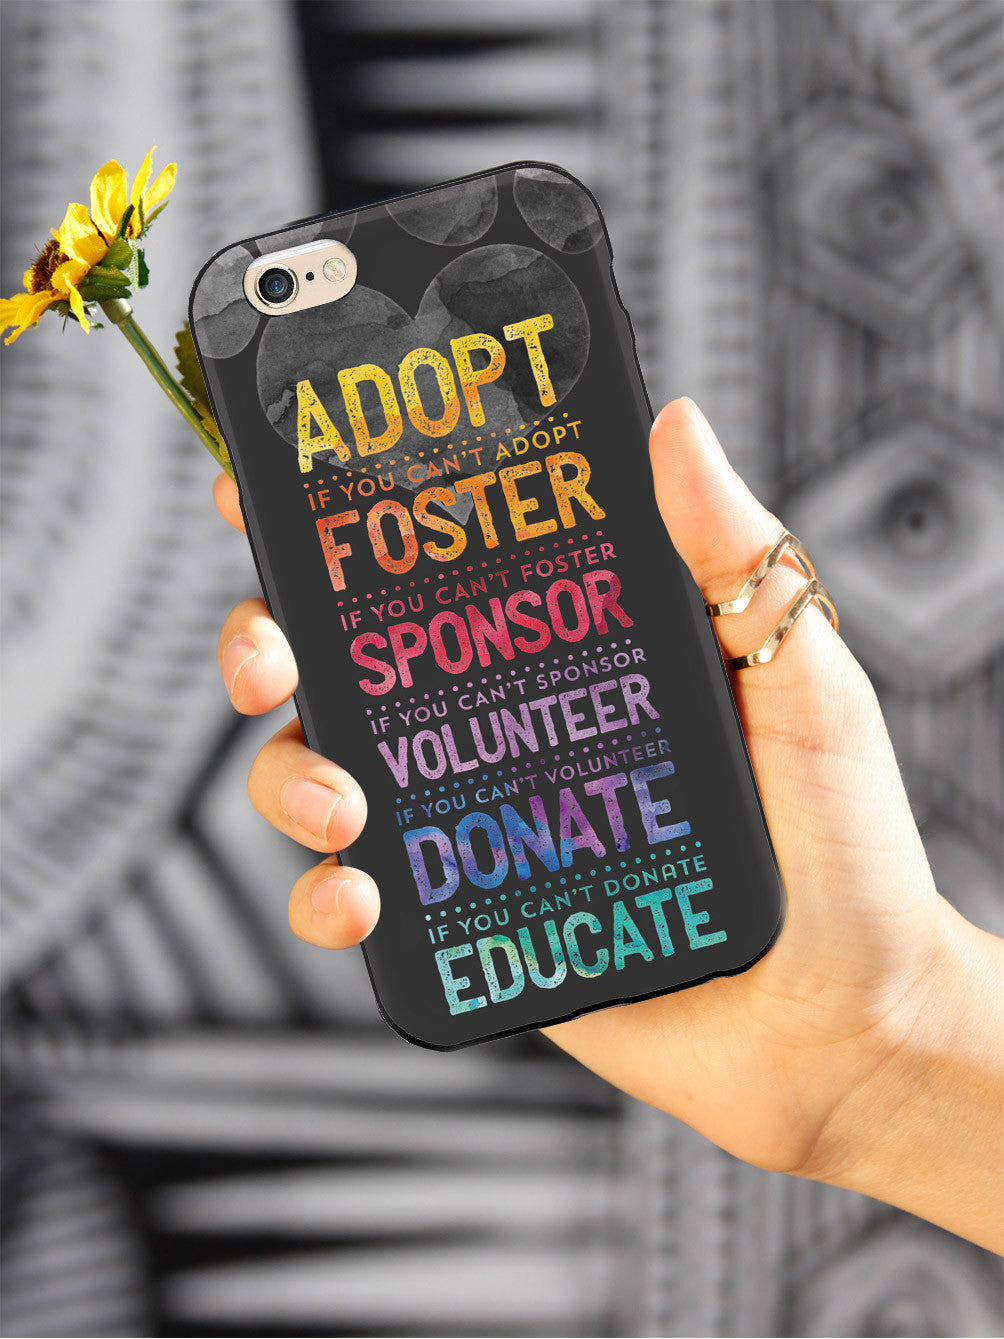 Adopt, Foster, Sponsor Educate - Do What YOU Can Case